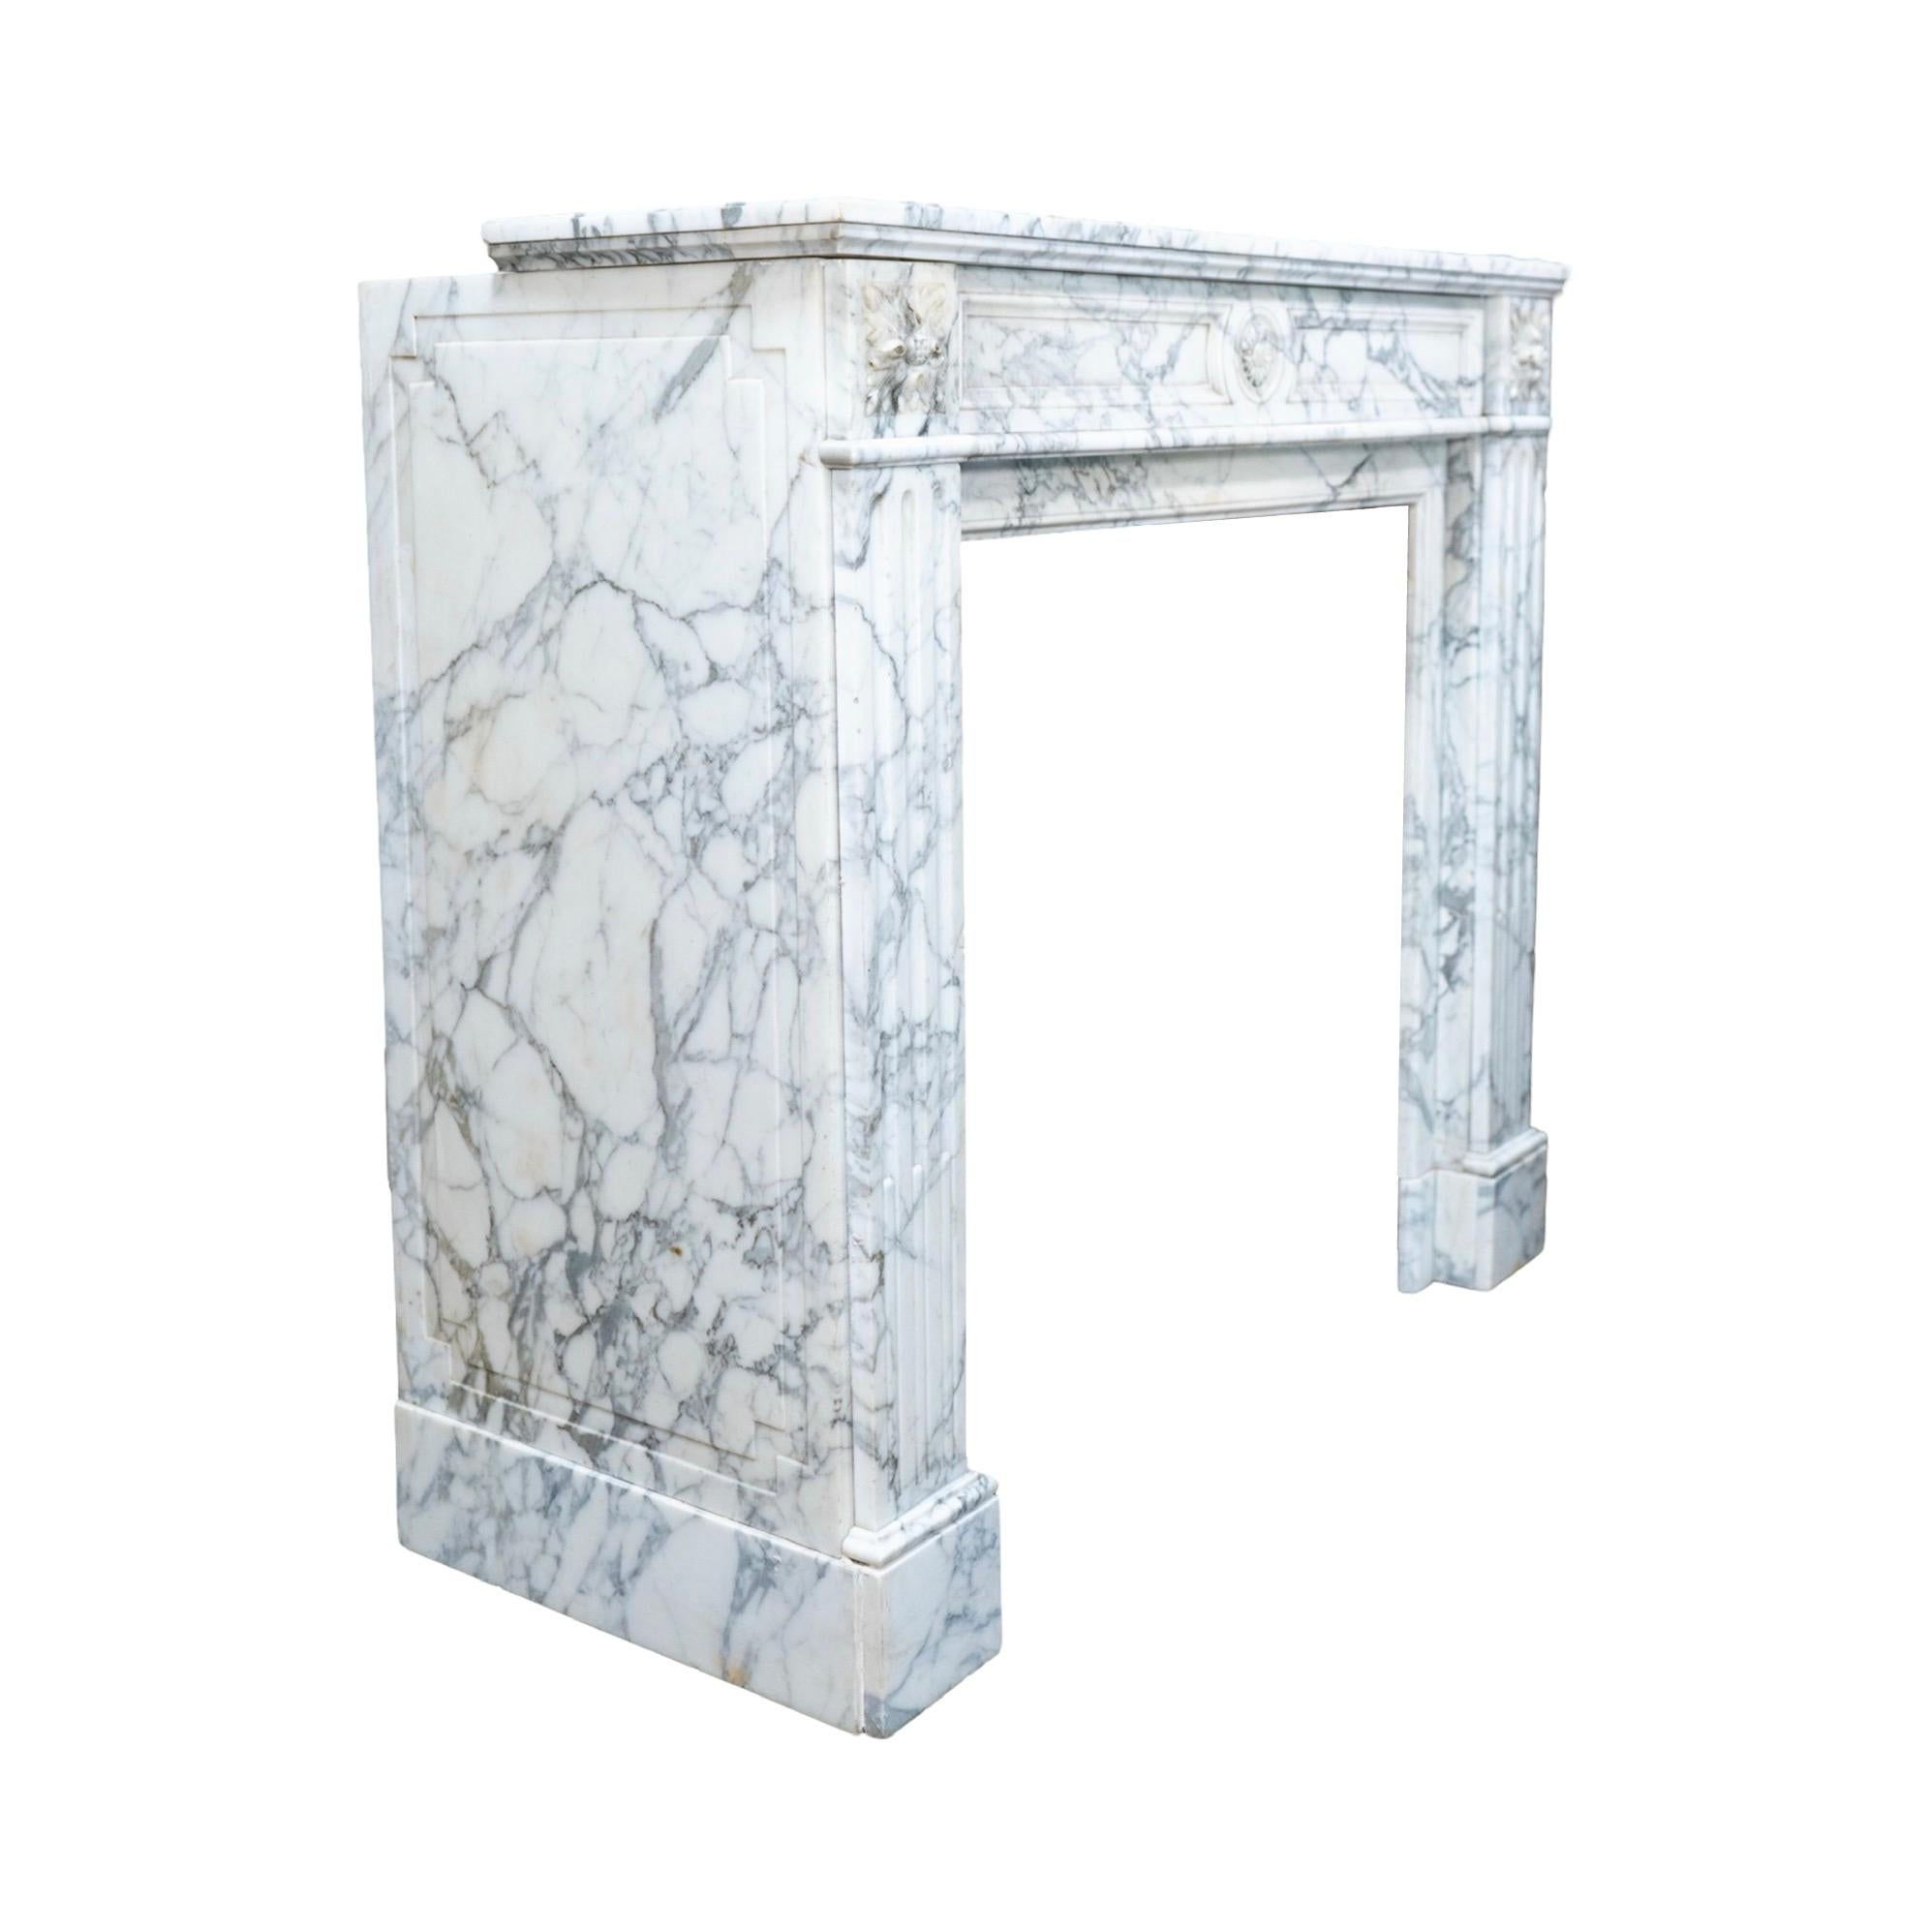 French White Veined Carrara Marble Mantel In Excellent Condition For Sale In Dallas, TX